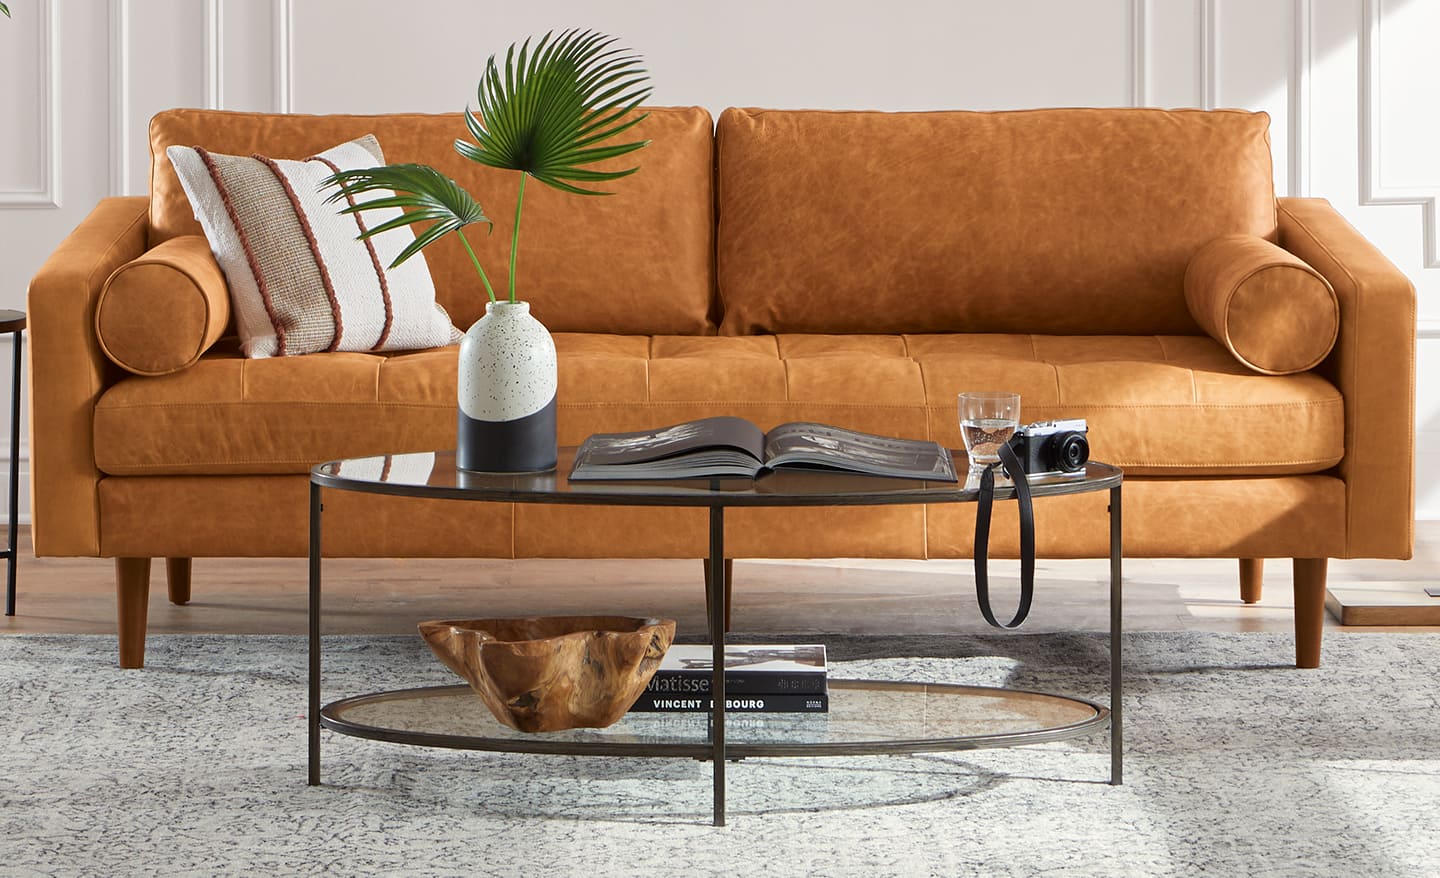 Coffee table with objects in a living room